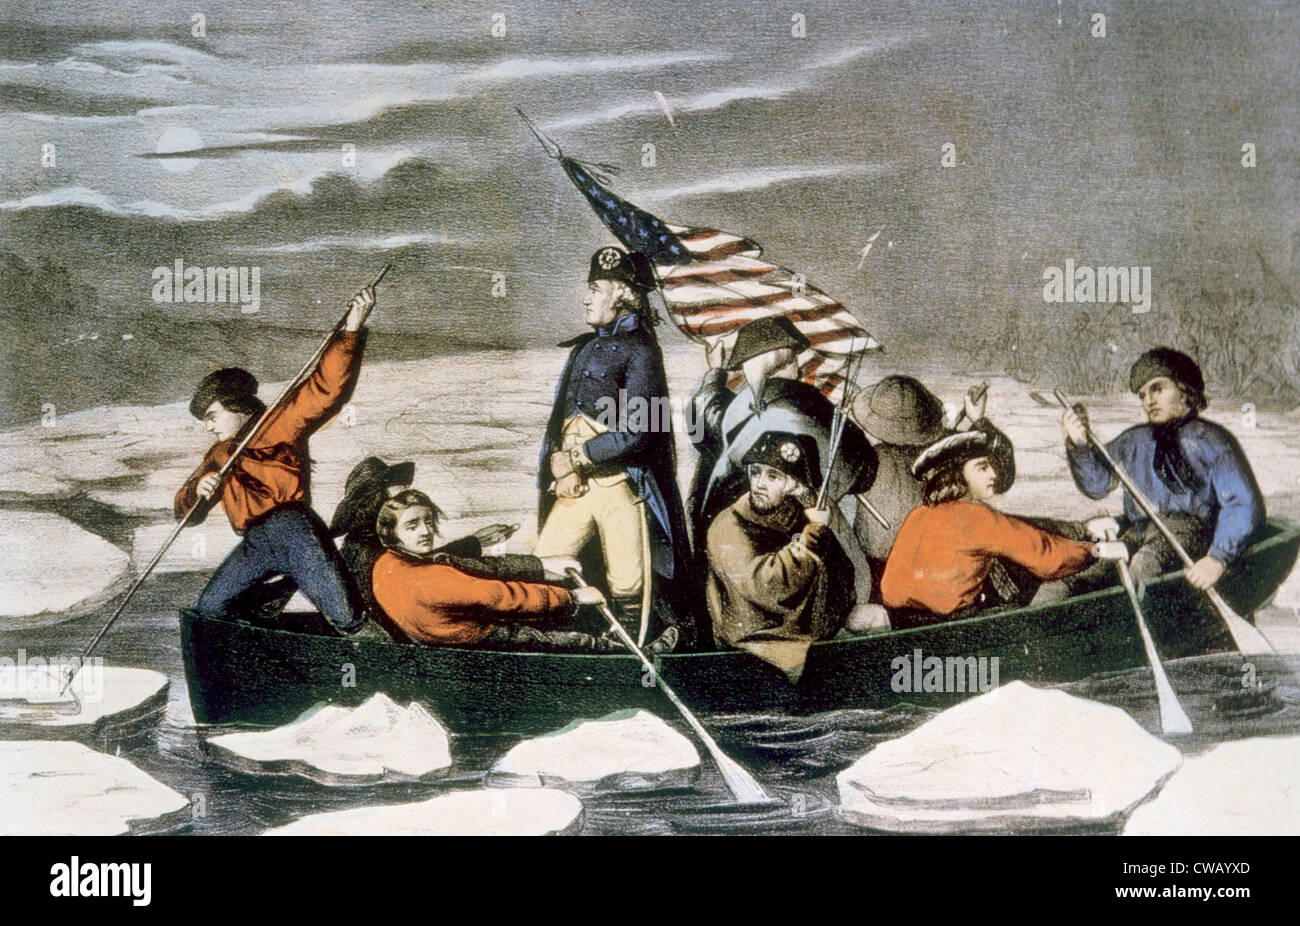 General George Washington crossing the Delaware River on the eve of the Battle of Trenton, December 25, 1776, lithograph by Stock Photo